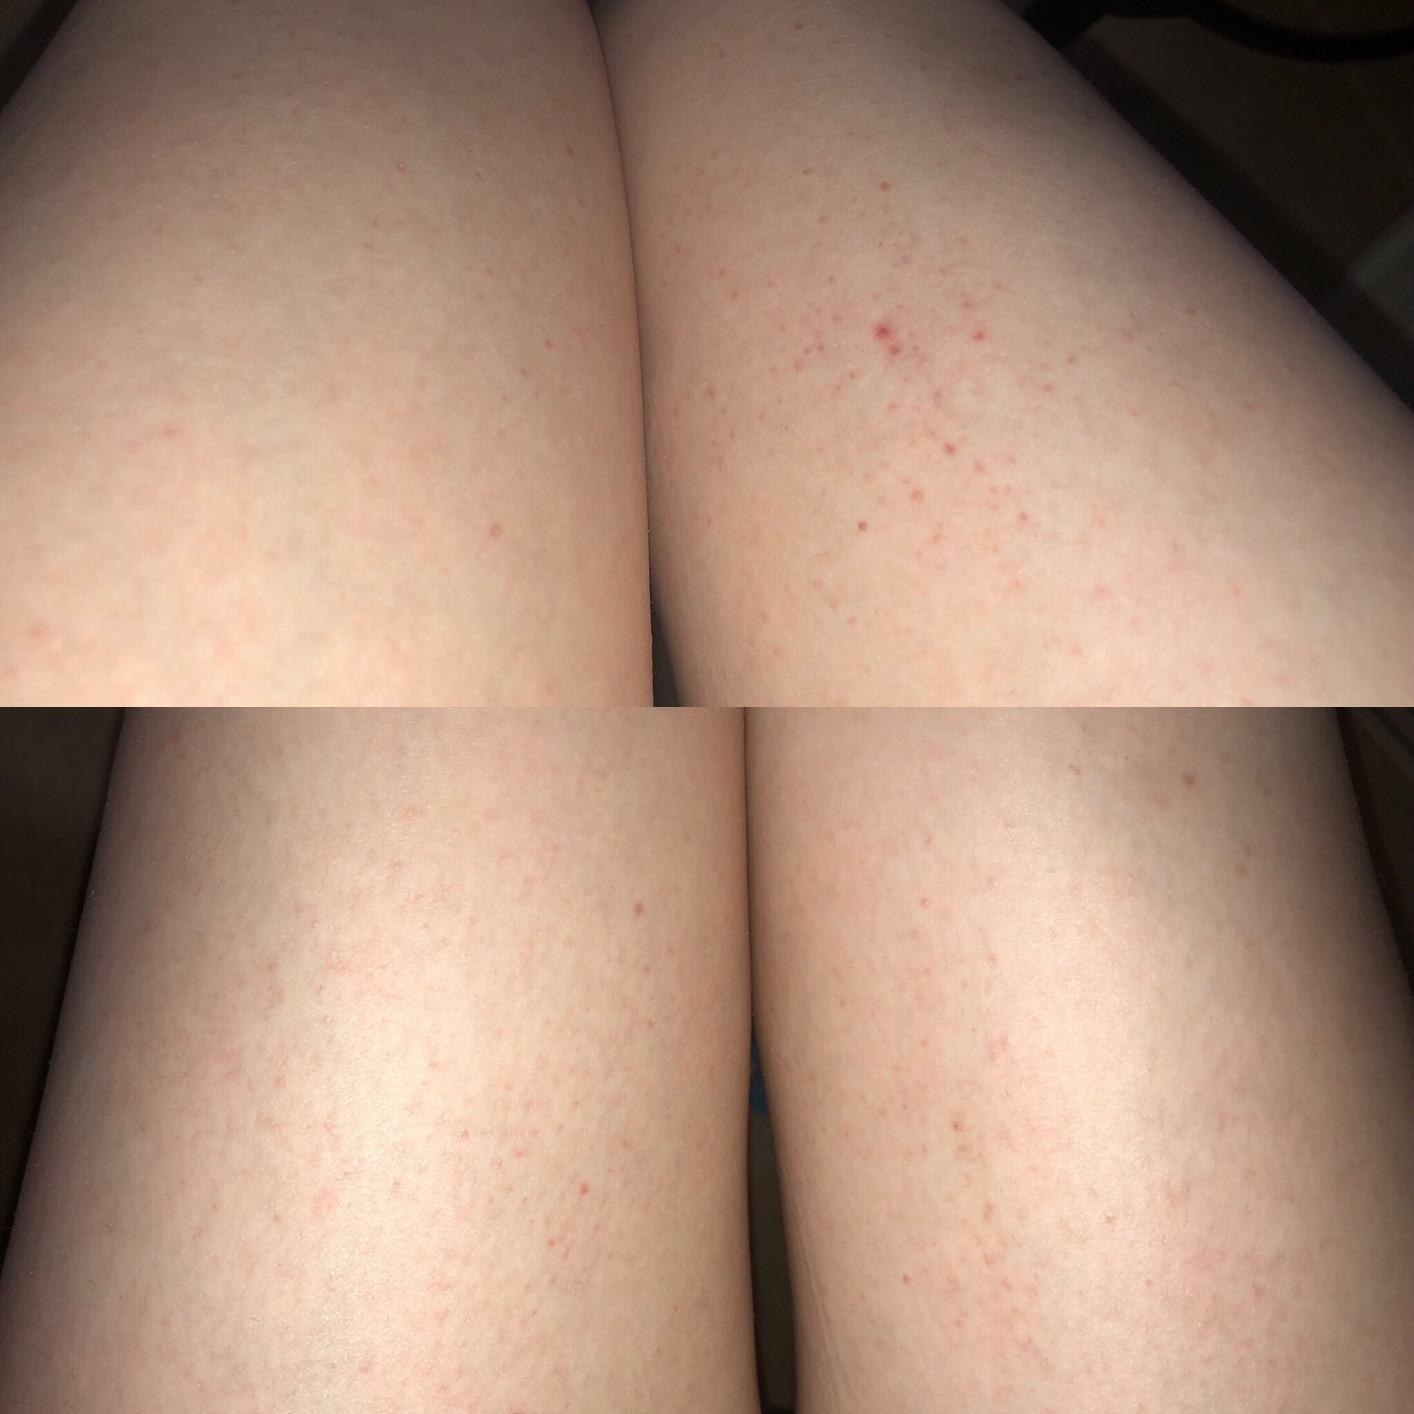 Before and after of reviewer who used the scrub to remove their keratosis pilaris from their legs